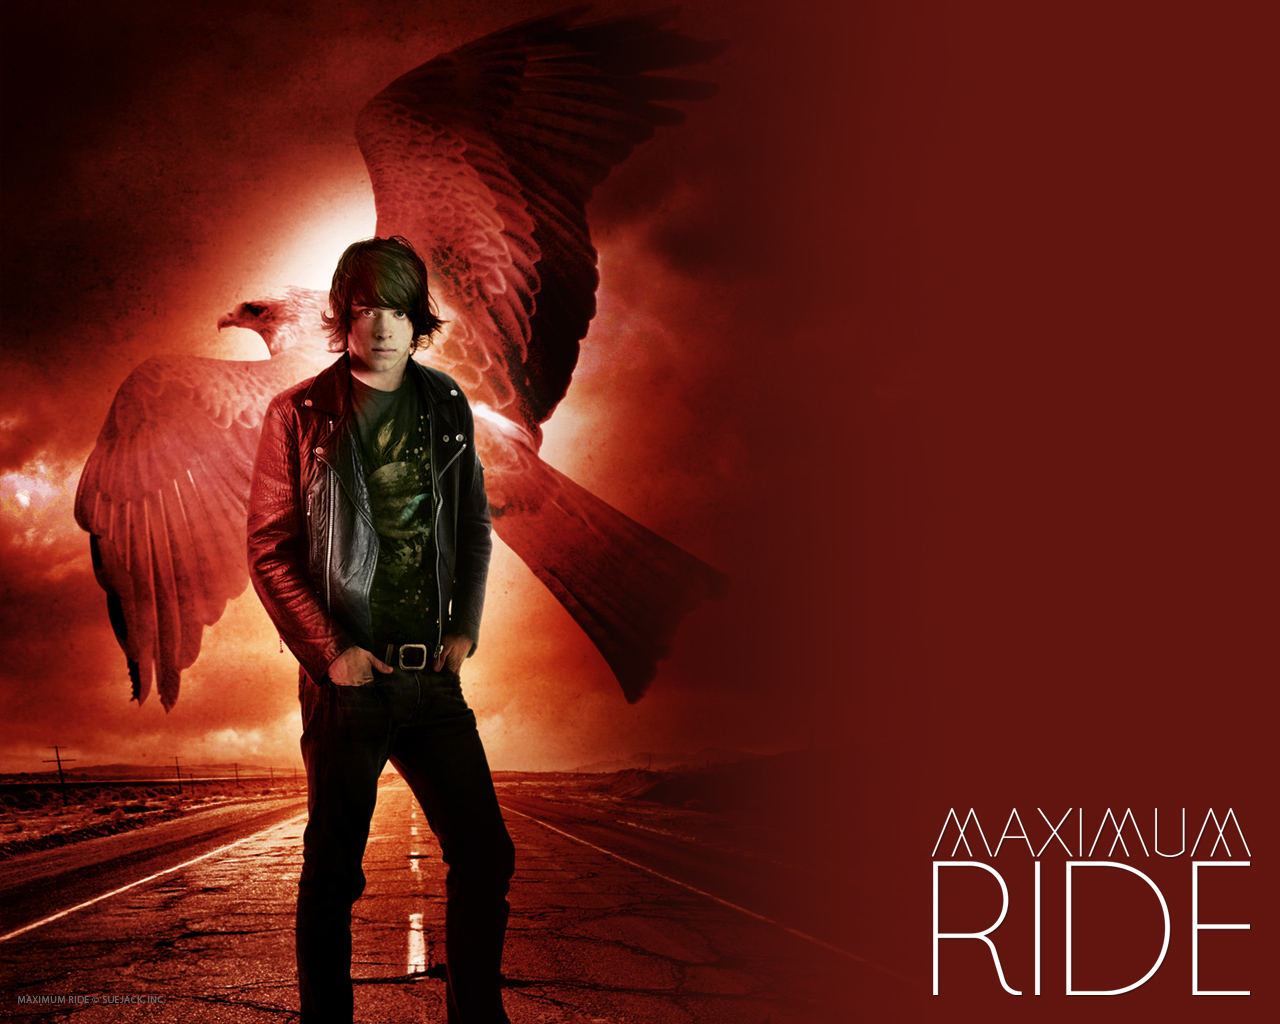 Find more Maximum Ride Downloads Wallpapers Buddy icons and more. 